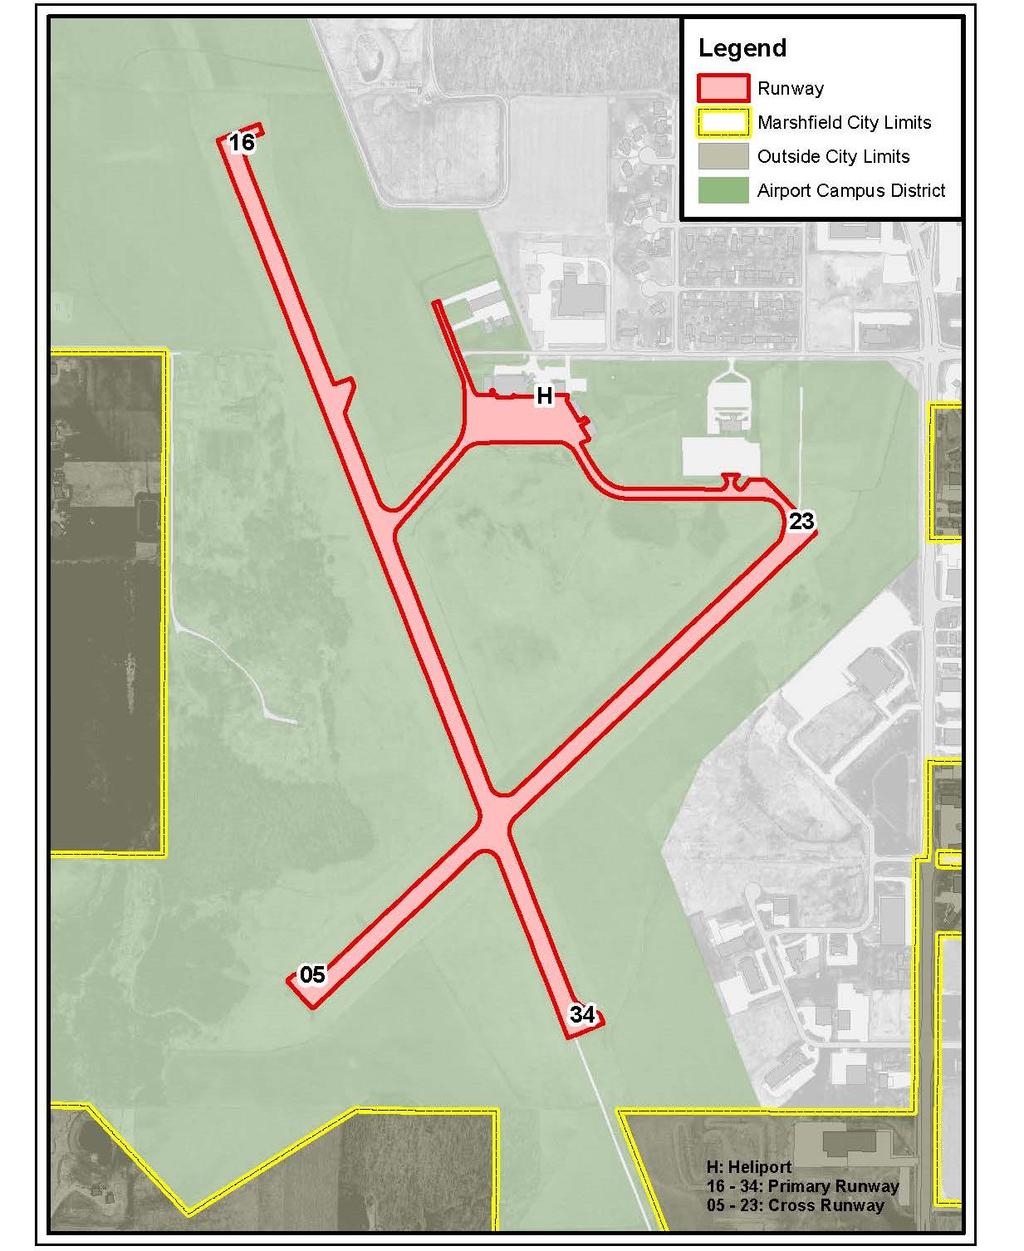 (2.) Runways Currently there are two operational runways on the airport campus district ground. There is a primary runway (16 34) which is hard surfaced, 100 wide by 5,002 long.